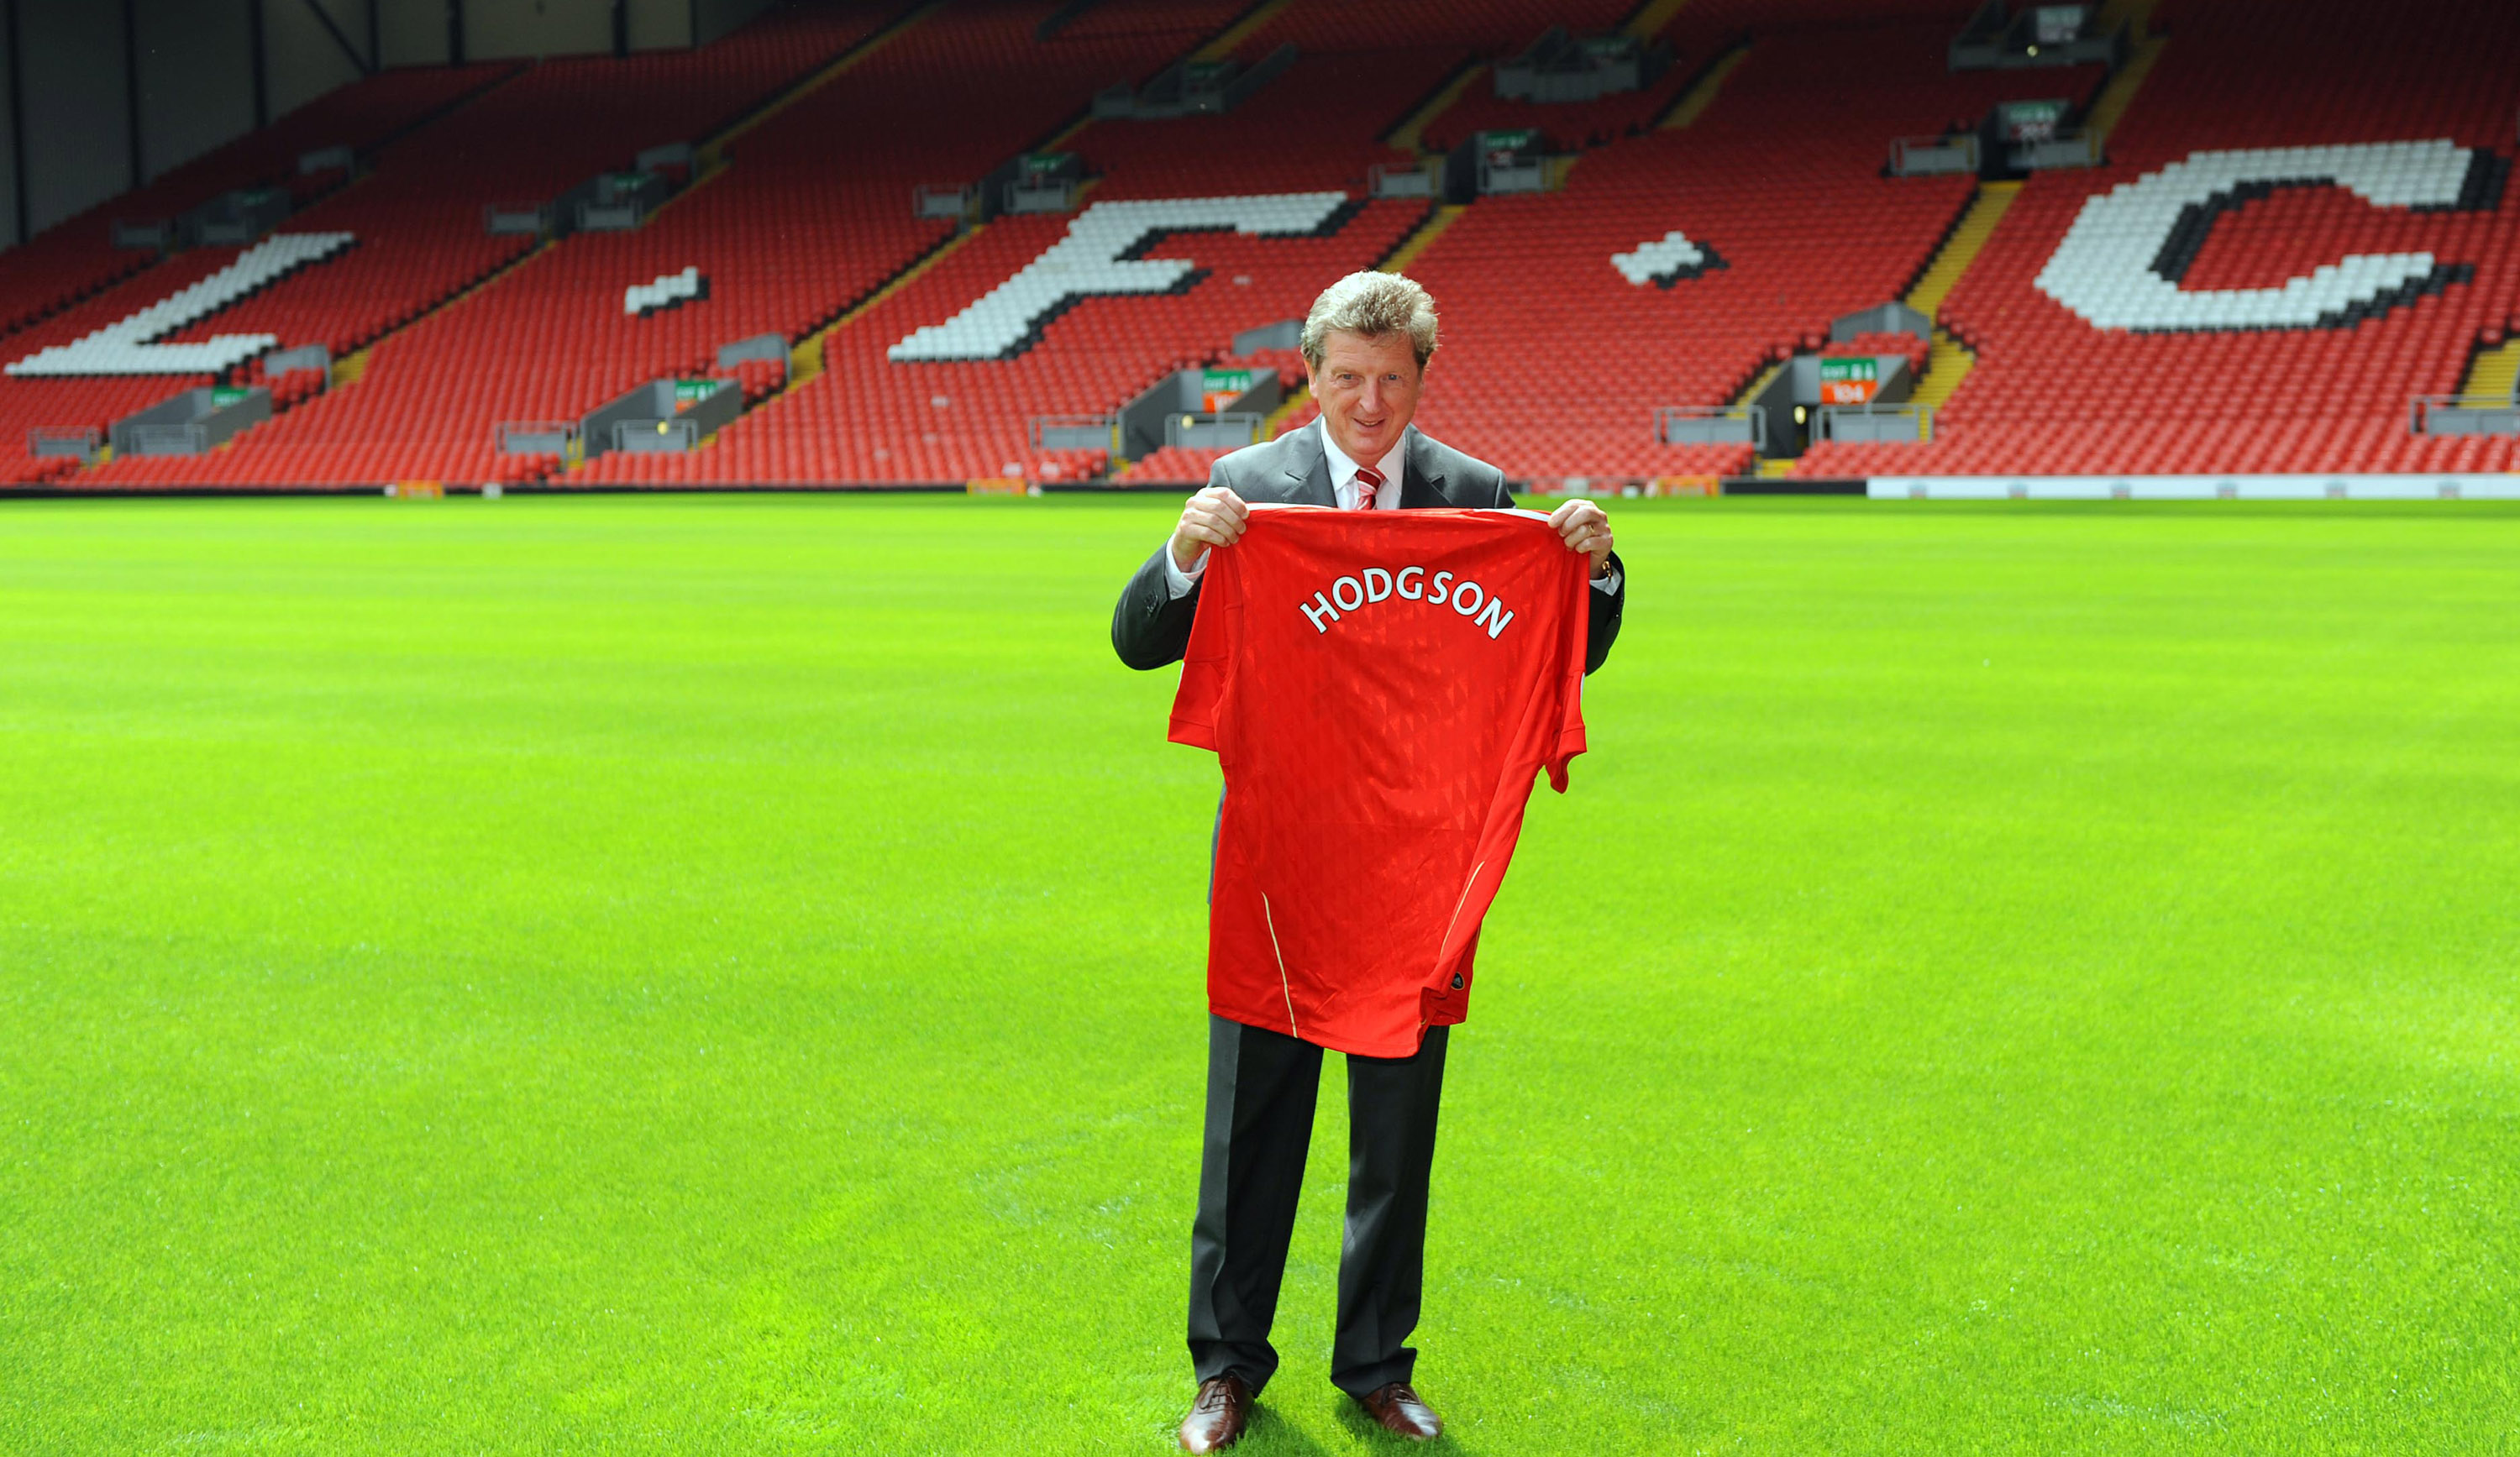 LIVERPOOL, UNITED KINGDOM - JULY 01:  Roy Hodgson is unveiled as the new Liverpool FC manager at Anfield on July 01, 2010 in Liverpool, England. (Photo by Clint Hughes/Getty Images)